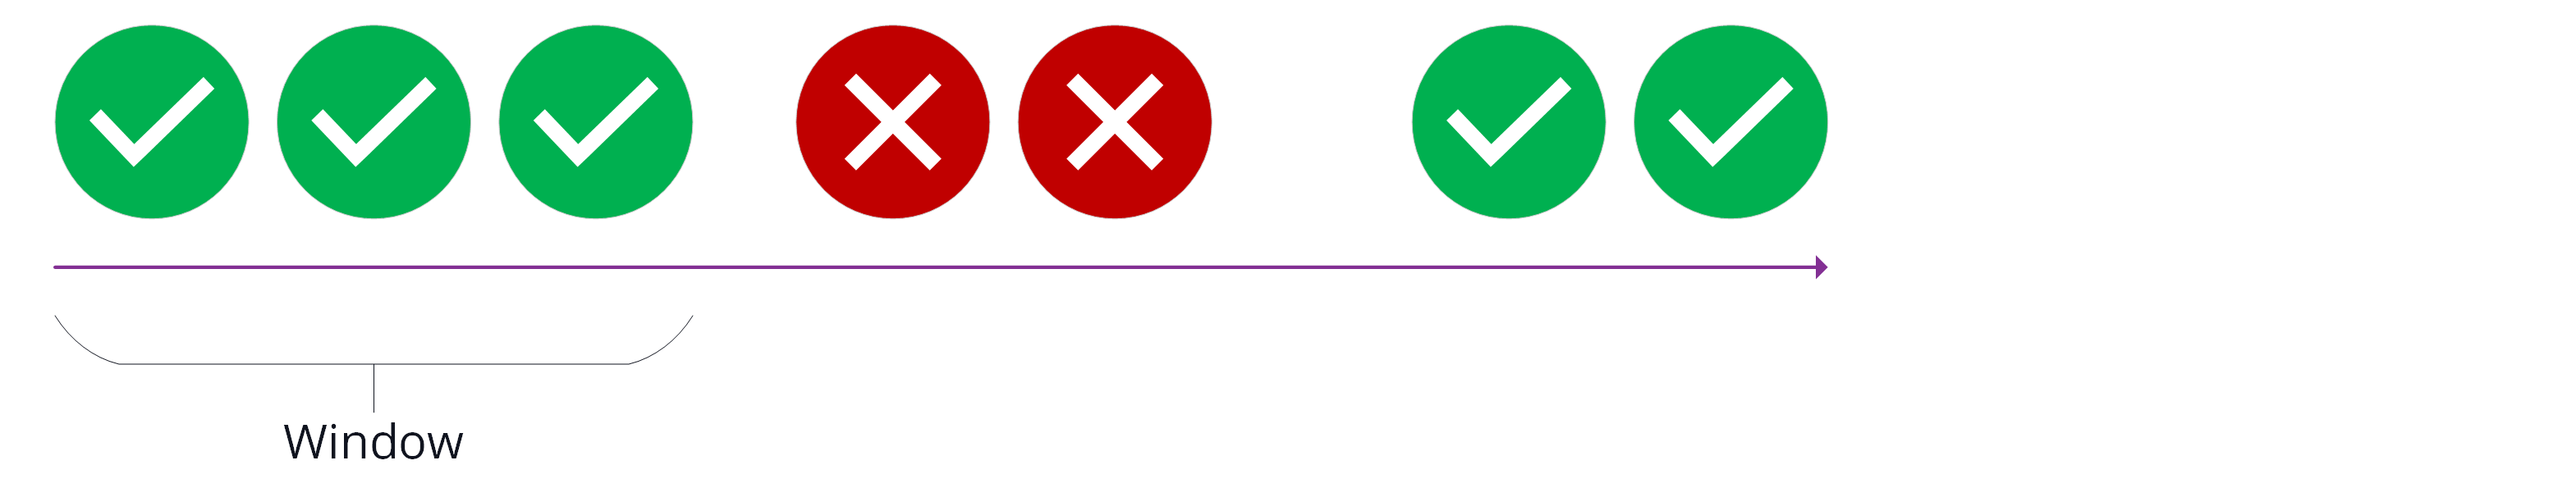 The graphic shows a row of grouped colored dots above a right-pointing arrow that denotes time. The first group has three dots close to each other and underneath is a bracket denoting the time window in the request limiter. This group of dots fits neatly inside the bracket, so each of them is green and decorated with a white checkmark to indicate a successfull request that request limiter allowed through. The second group of two dots follows closely after the first group, but falls outside the window of the request limiter. The two dots are red and have a white cross, indicating requests that the request limiter blocked. There is a slightly longer gap before the third group of dots. These dots are again green with white checkmark; the request limiter has reached the timeout and started a new window, so requests are again allowed through.